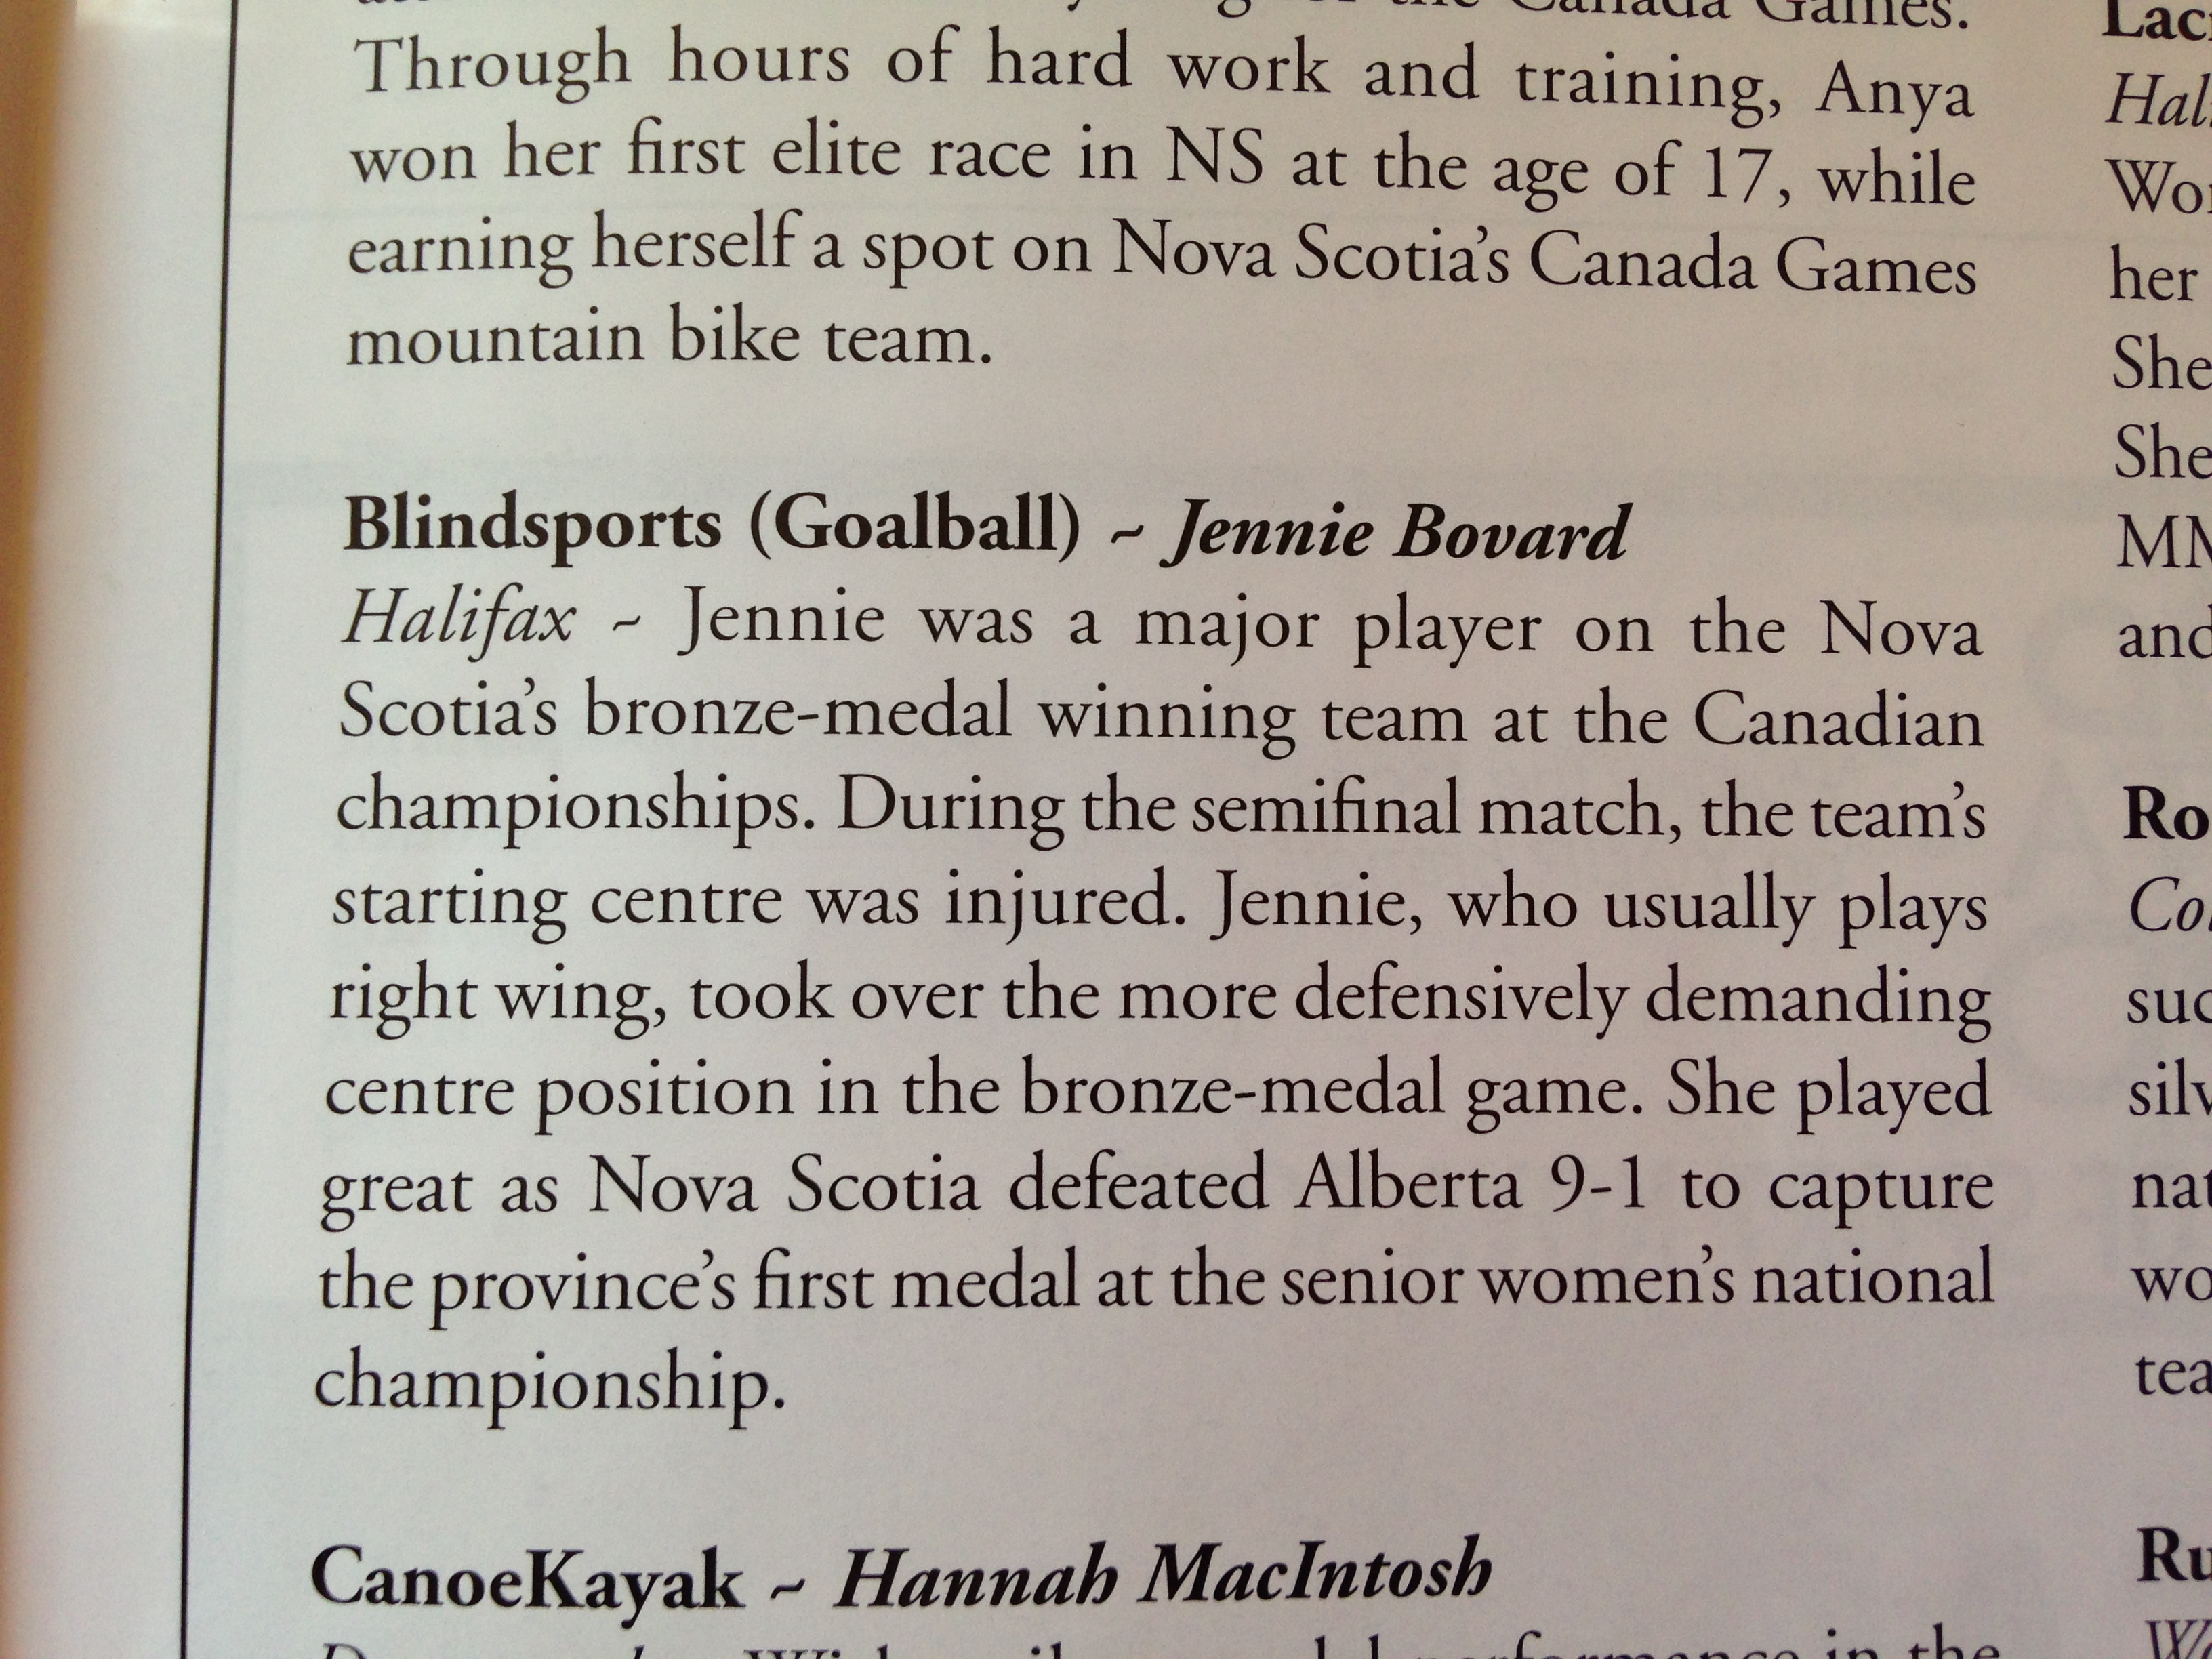 Female Team Athlete of the Year - Jennie Bovard, Halifax Jennie was a major player on Nova Scotia's bronze medal winning team at the Canadian championships. During the semi-final match, the team's starting centre was injured, Jennie, who usually plays right wing, took over the more defensively demanding centre position in the bronze medal game. She played great as Nova Scotia defeated Alberta 9 to 1 to capture the pronvince's first medalat the senior women's national championship. 